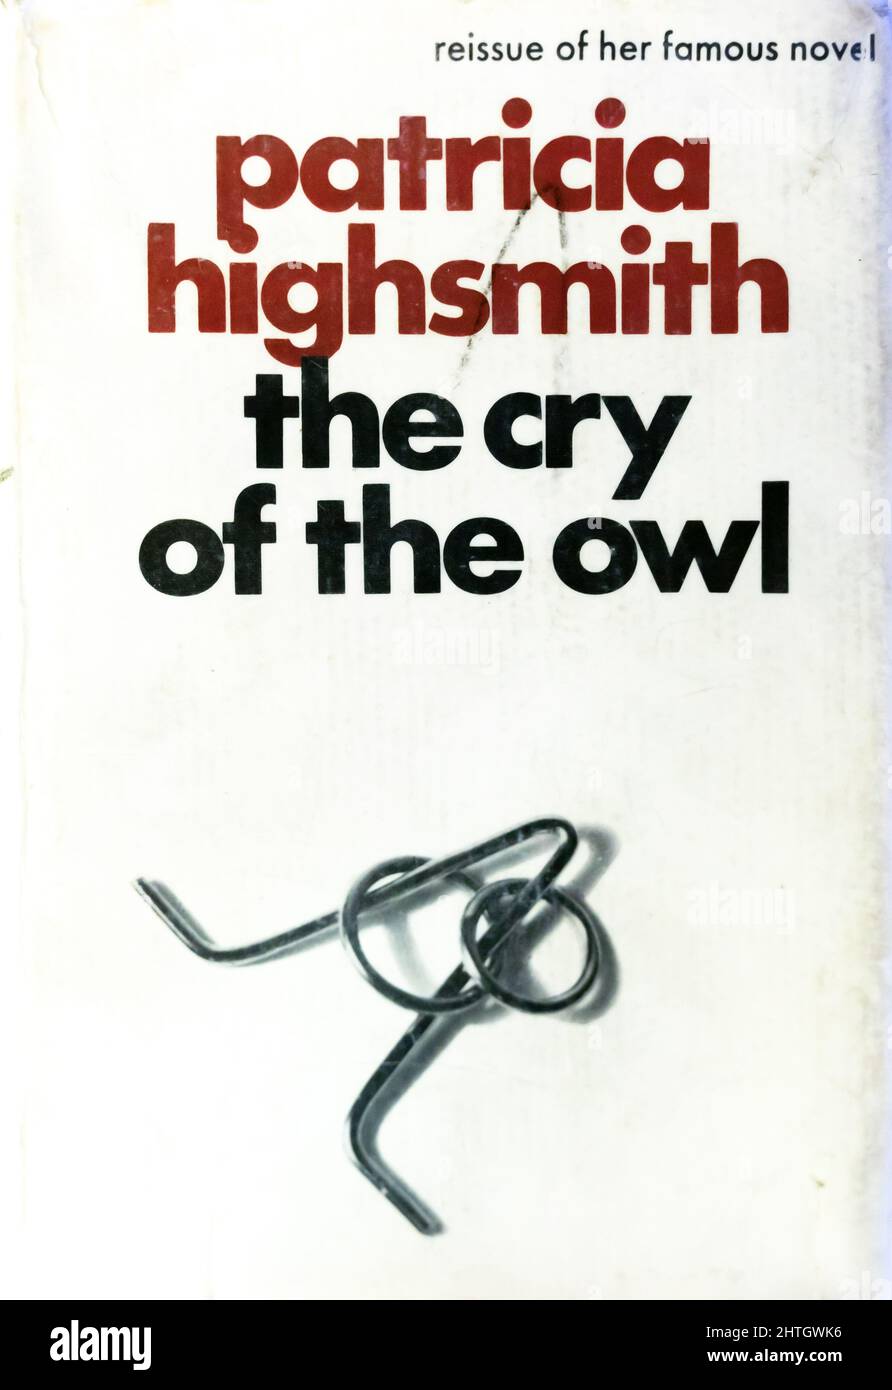 Book cover of Patricia Highsmith psychological thriller novel The Cry of the Owl first published in 1962, this edition by Heinemann, London Stock Photo